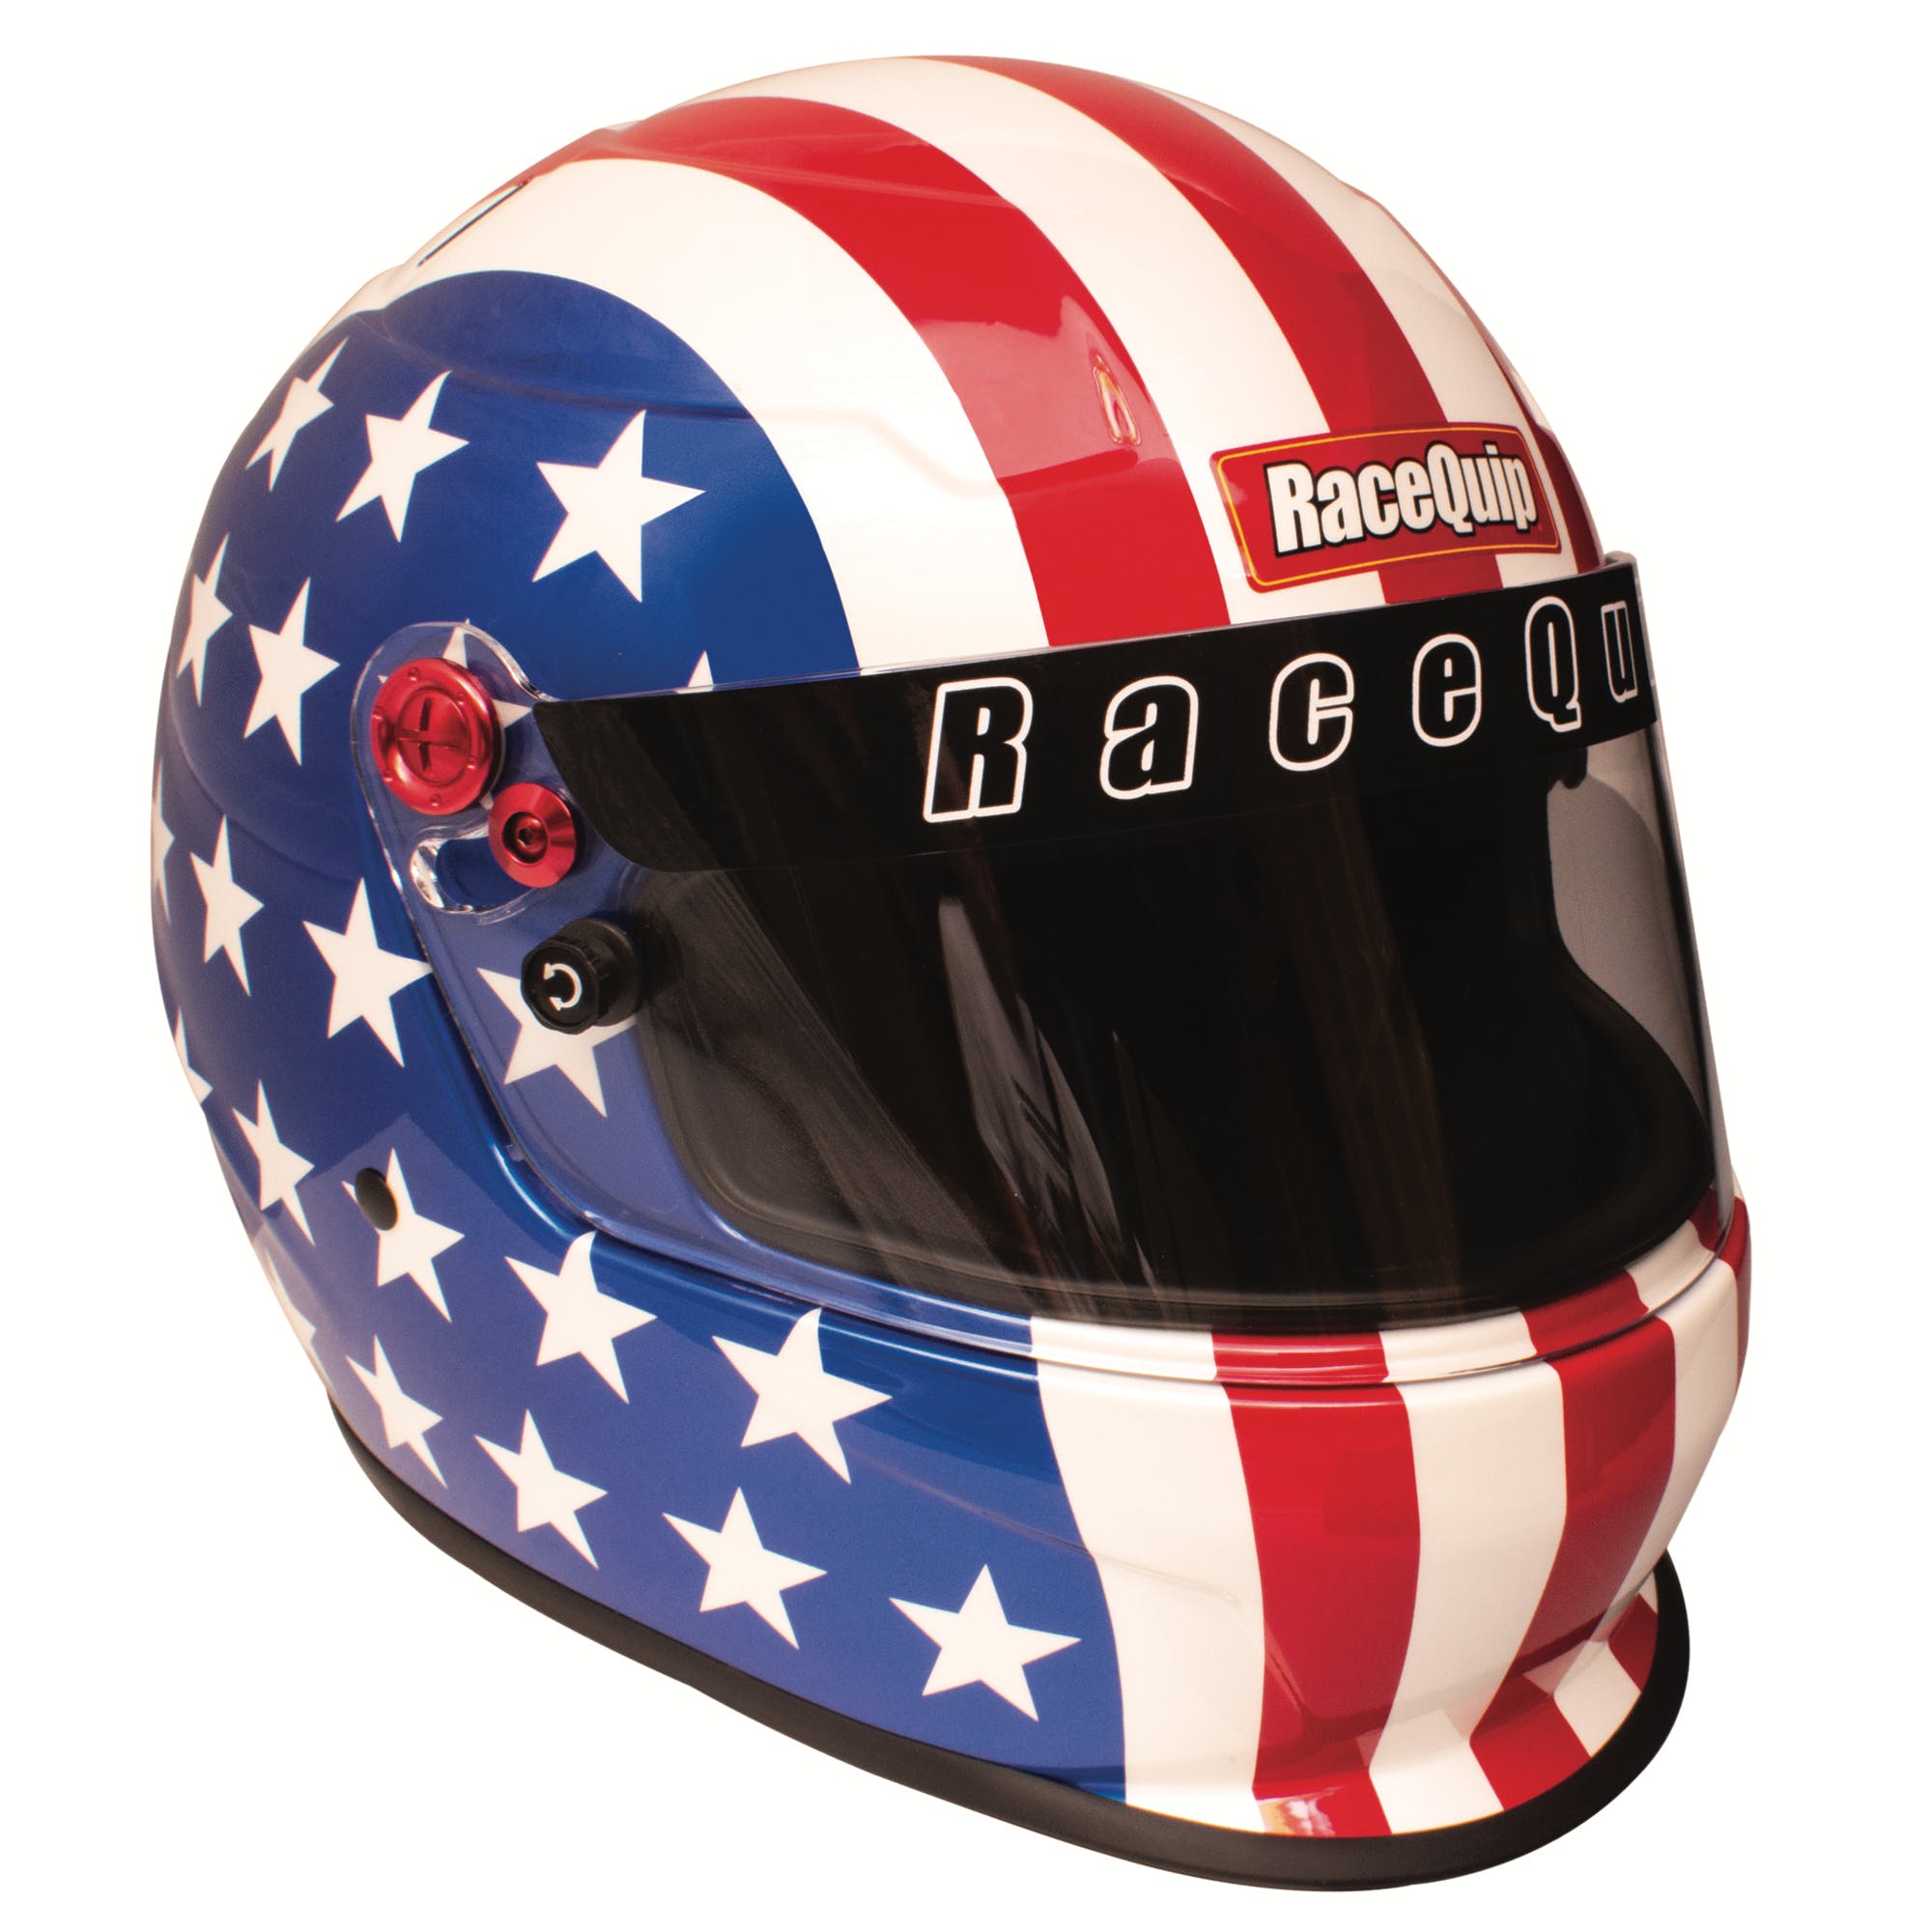 RaceQuip 276126 PRO20 Full Face Helmet Snell SA2020 Rated; America Graphic X-Large